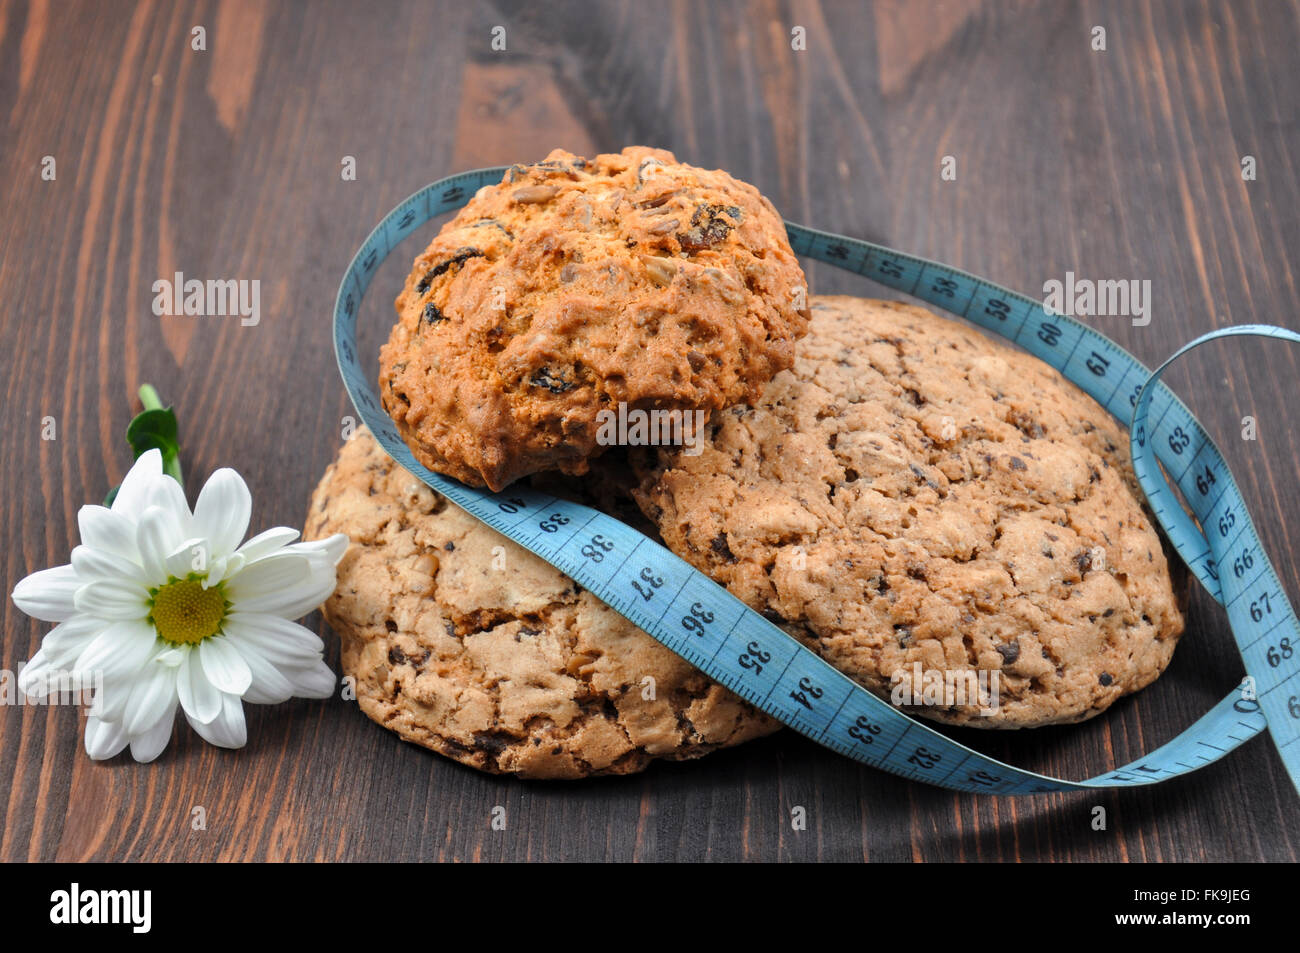 Three cookies with cereals on a wooden background Stock Photo